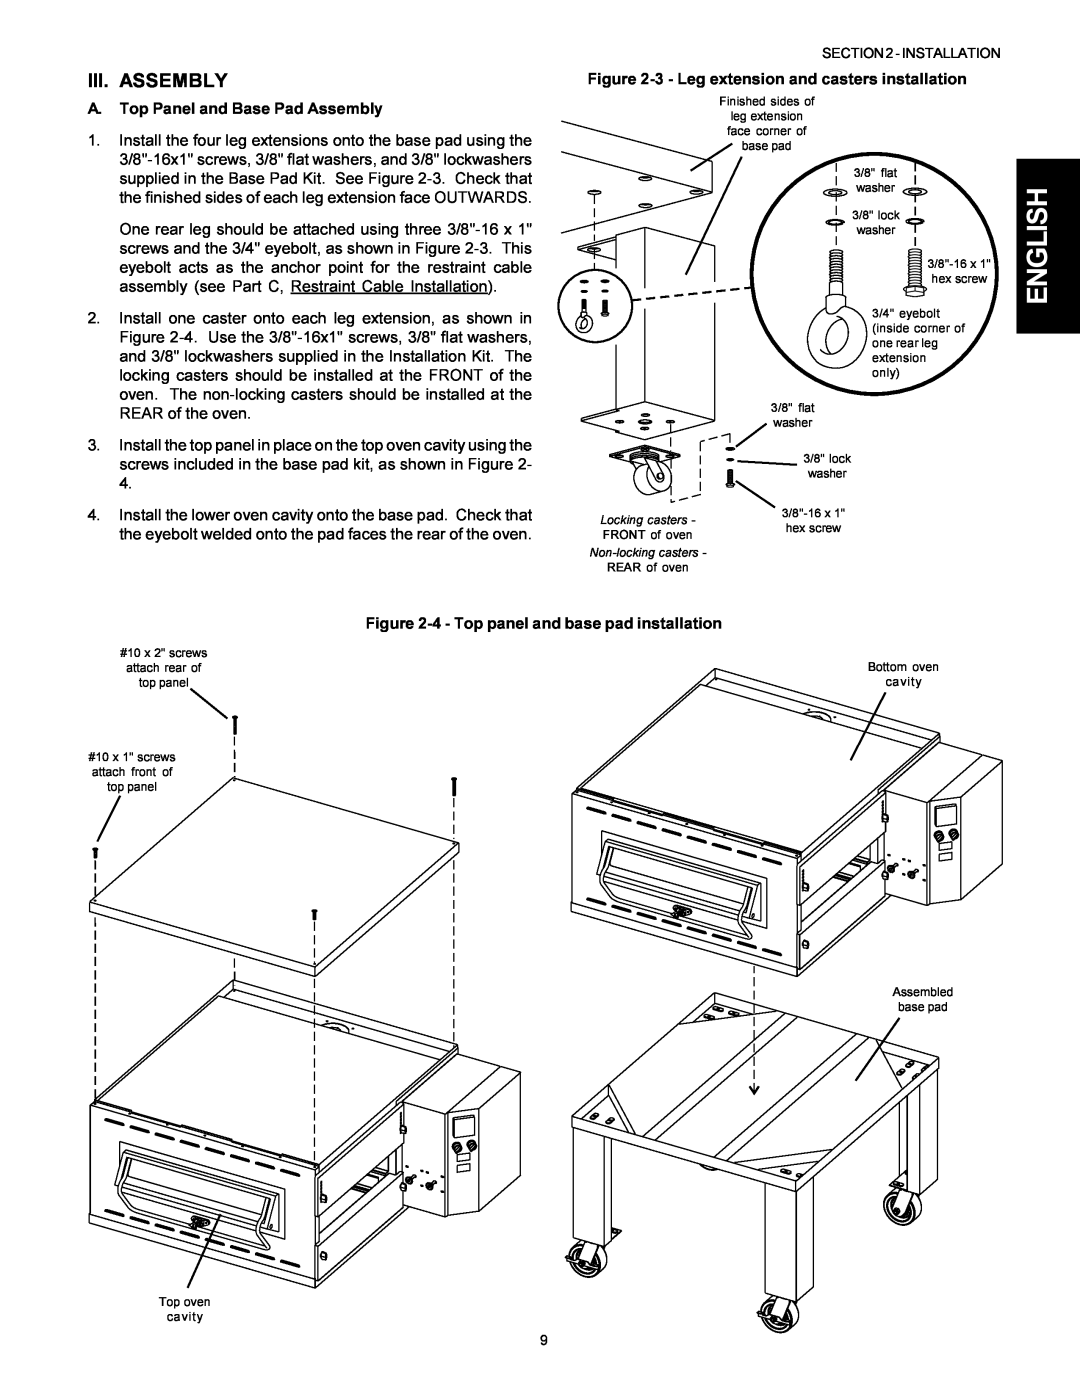 Middleby Marshall Model PS536 installation manual English, Iii. Assembly, 3 - Leg extension and casters installation 